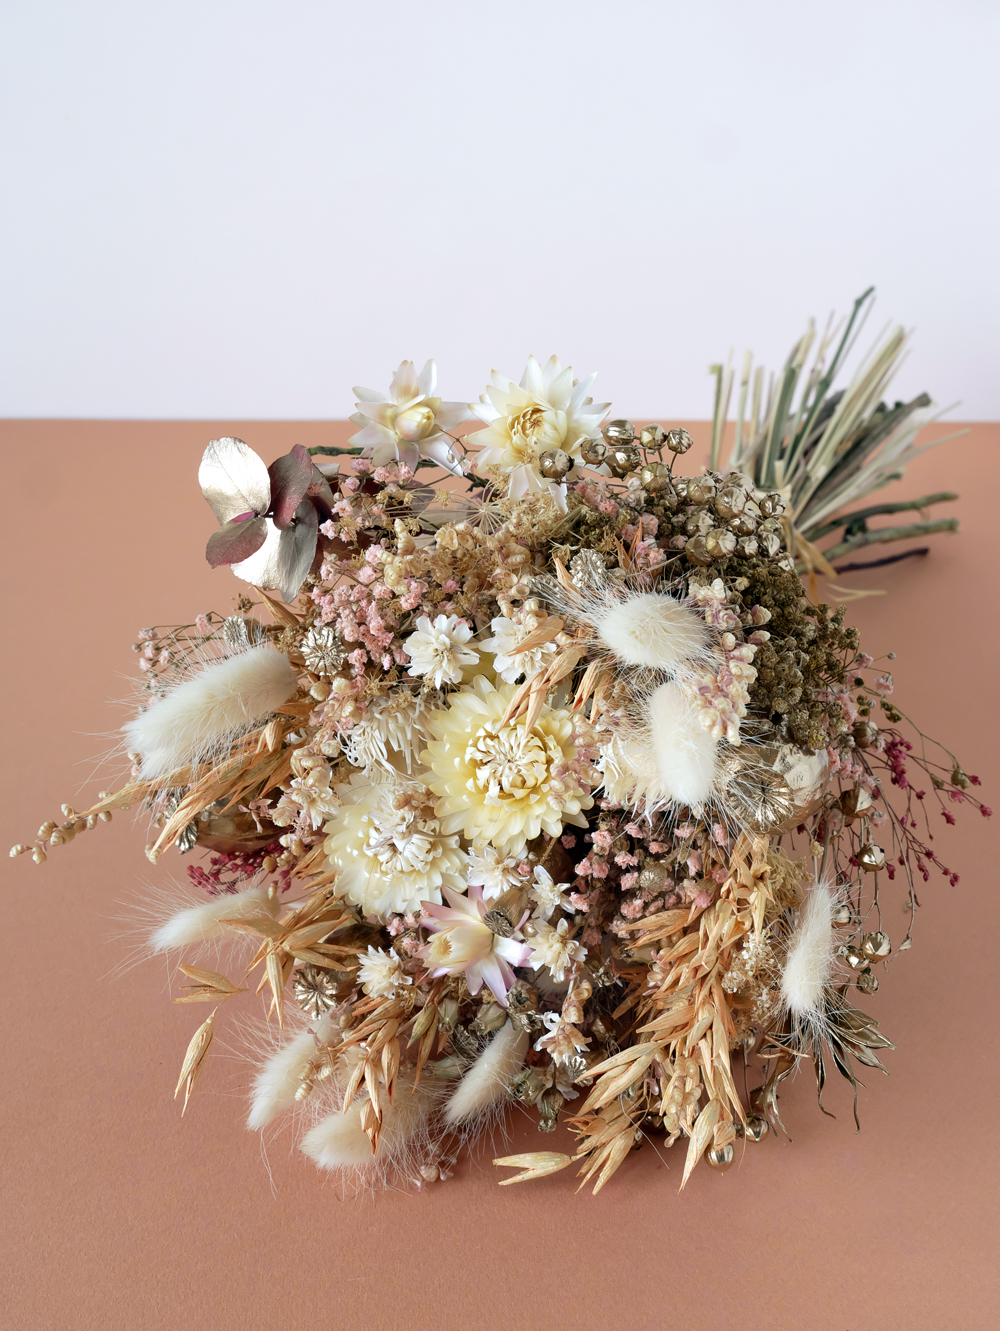 Pompon Bazar Bouquet of Dried Flowers "Classic" Pink, Salmon and Gold